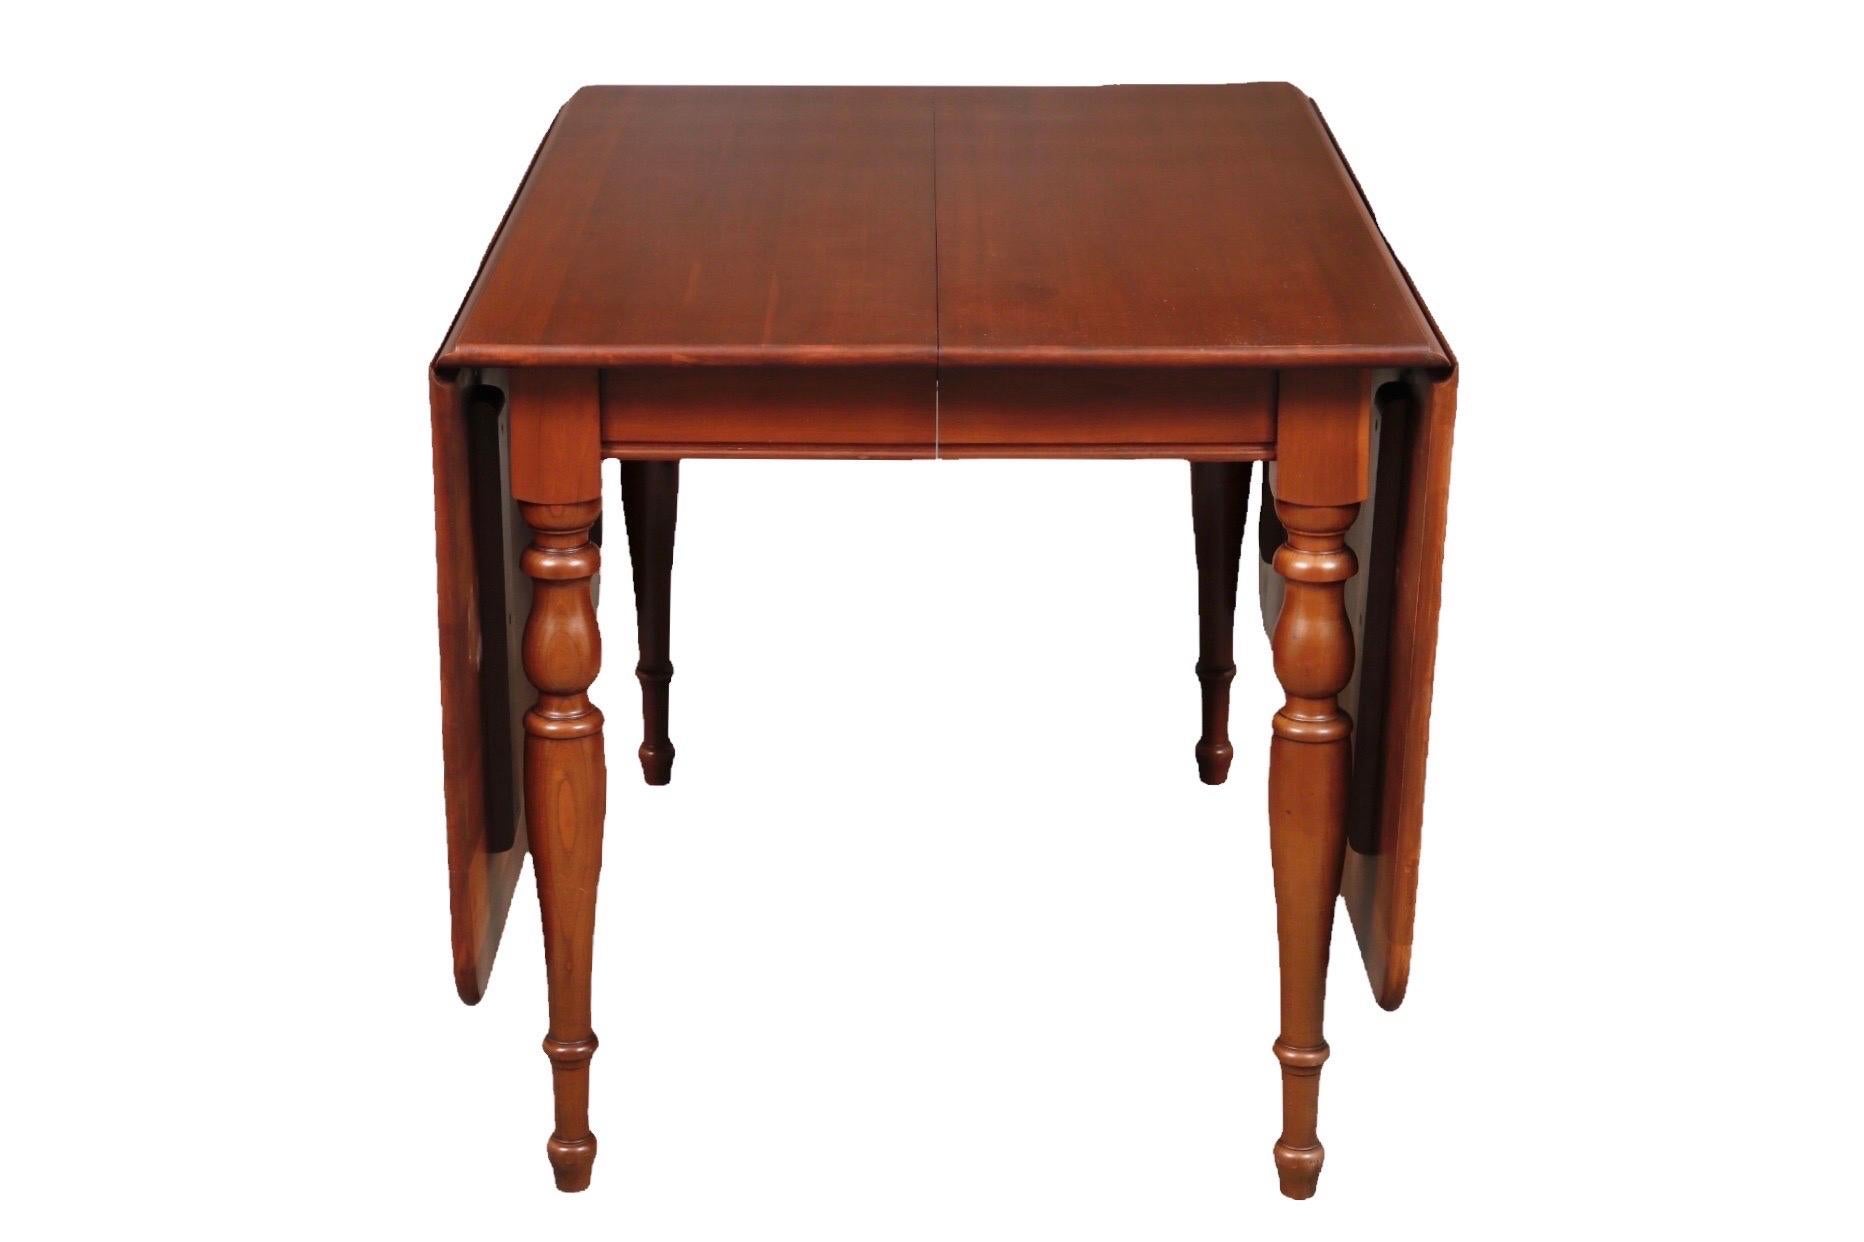 Mid-20th Century Taylor-Jamestown Cherry Wood Dining Table